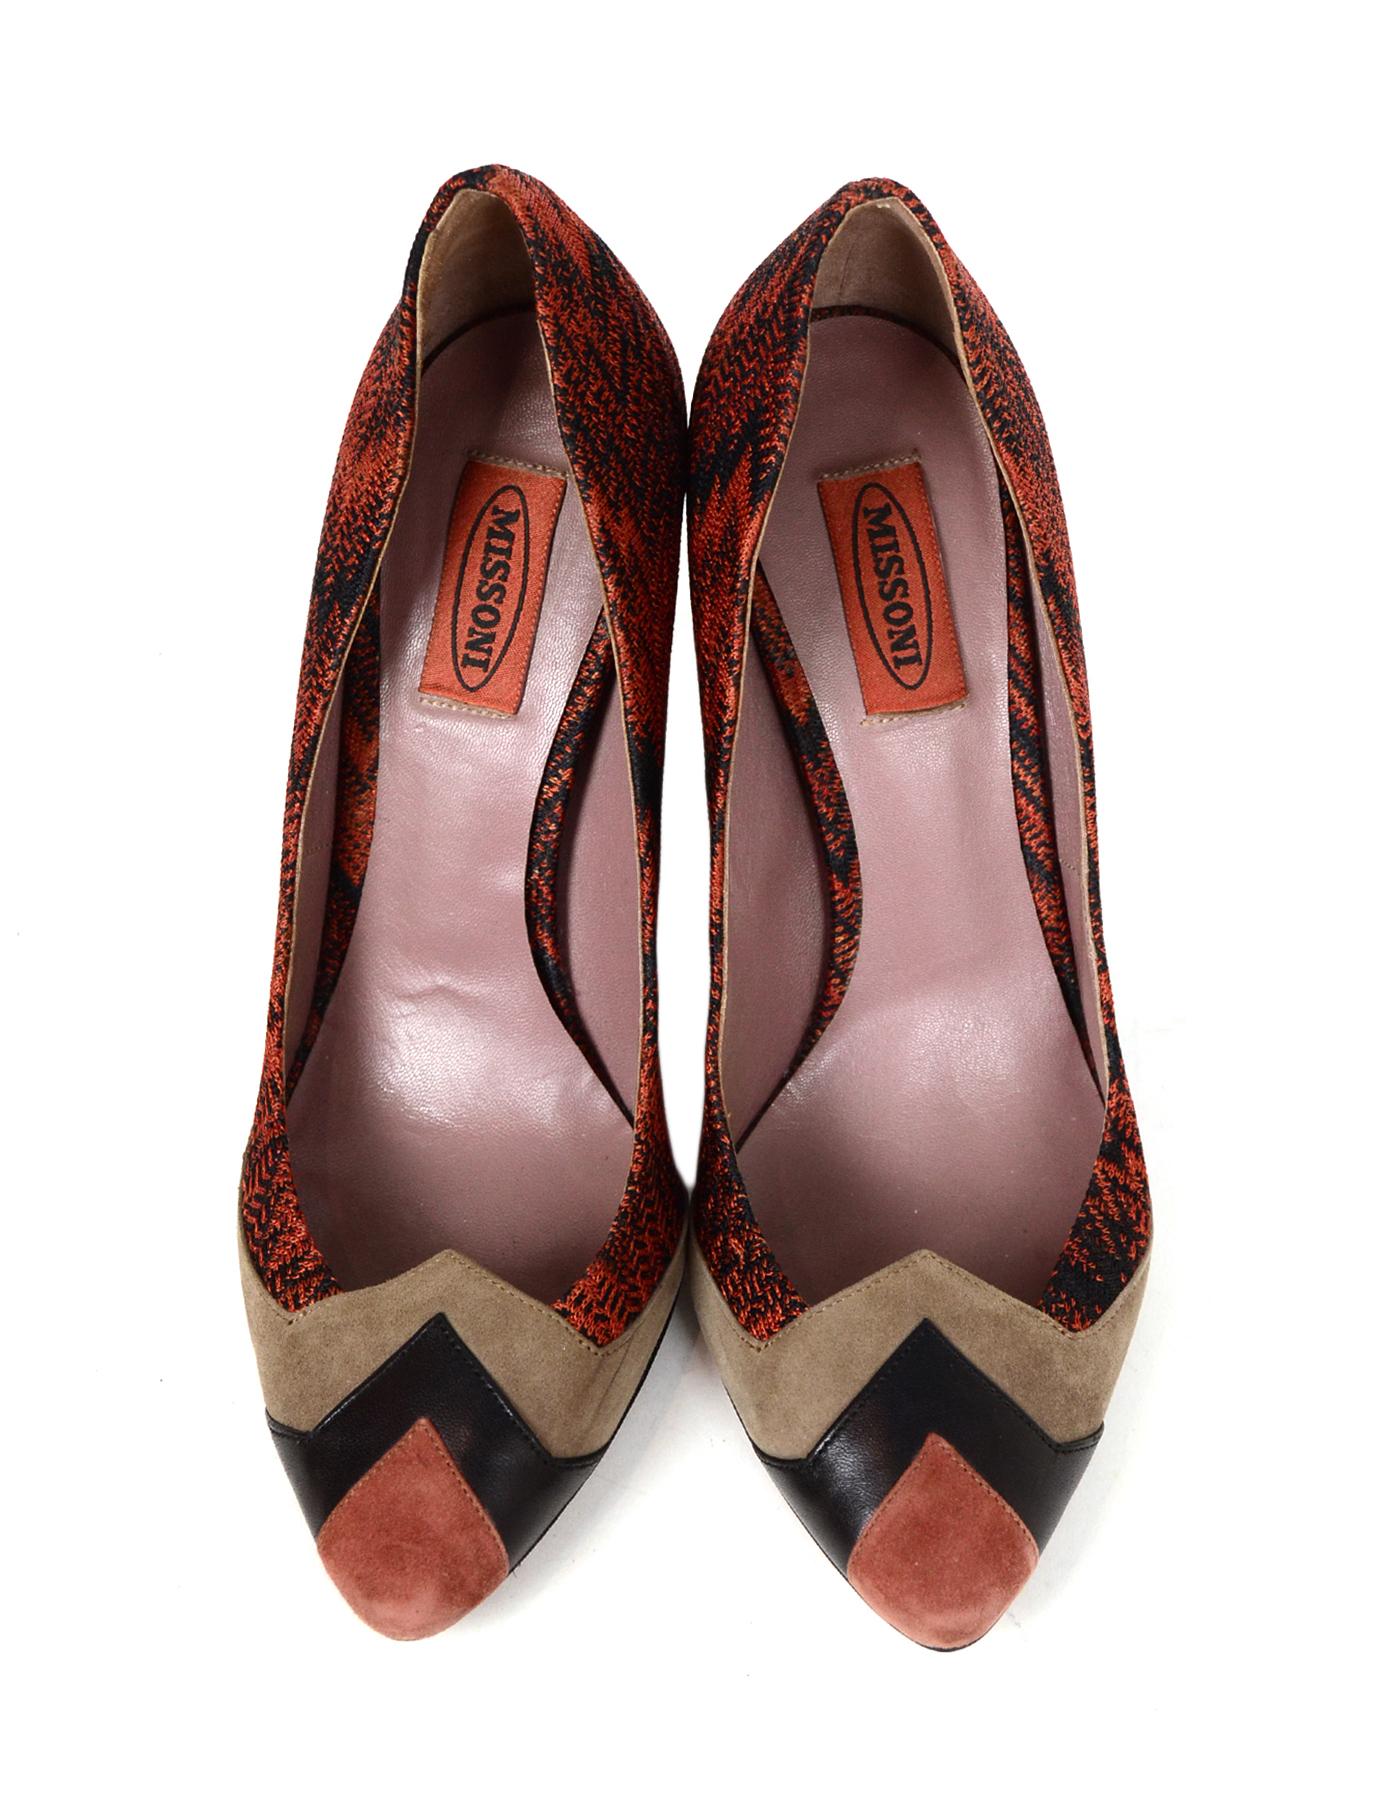 Missoni Orange/Black Knit/Leather Cap Toe Heels sz 39 In Excellent Condition In New York, NY